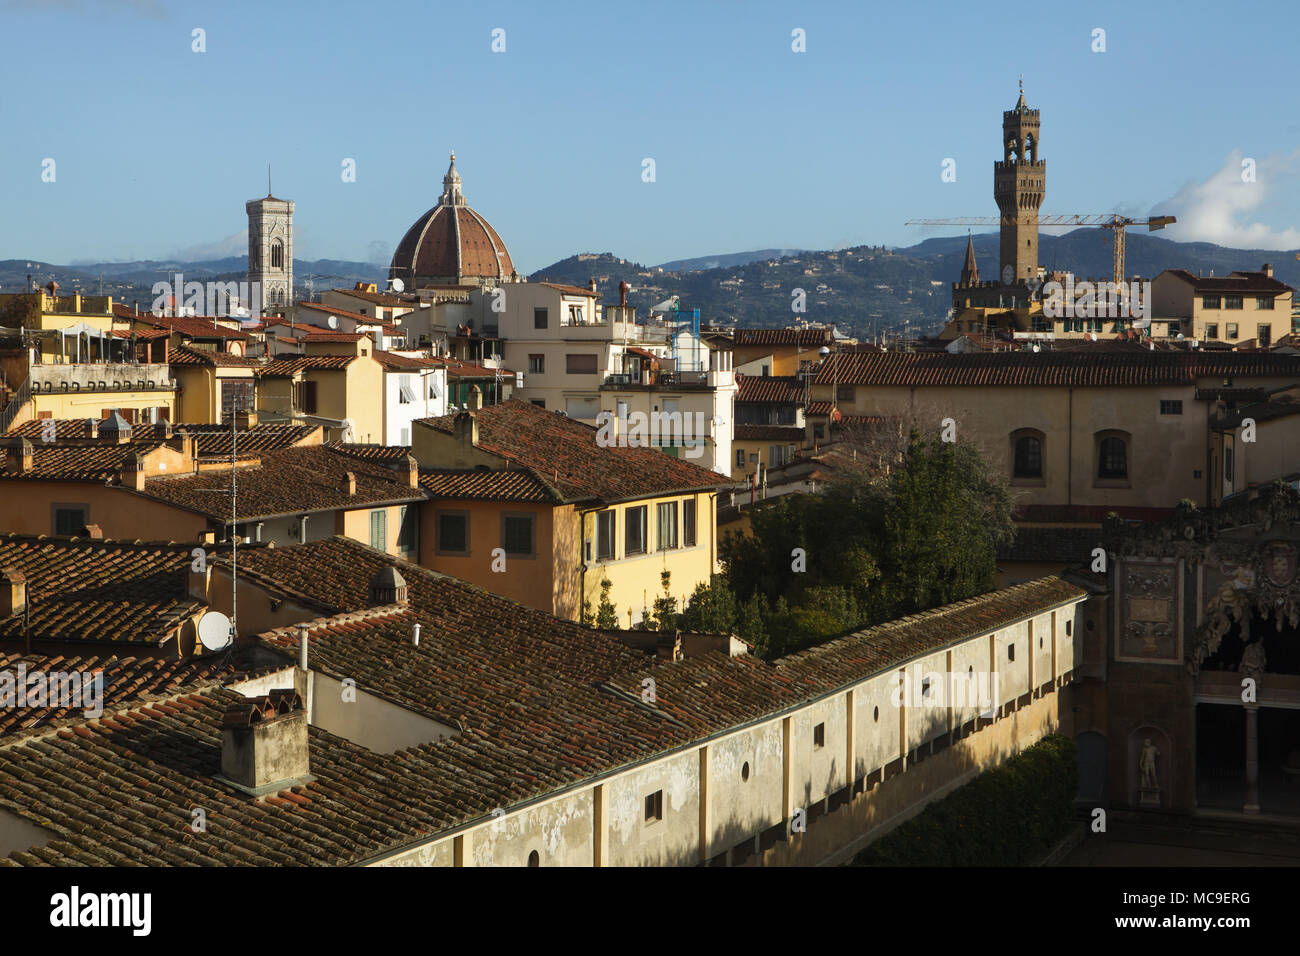 Campanile di Giotto (Giotto's Campanile) and the Florence Cathedral (Cattedrale di Santa Maria del Fiore) and the Palazzo Vecchio (from left to right) pictured from a window of the Palazzo Pitti in Florence, Tuscany, Italy. Stock Photo